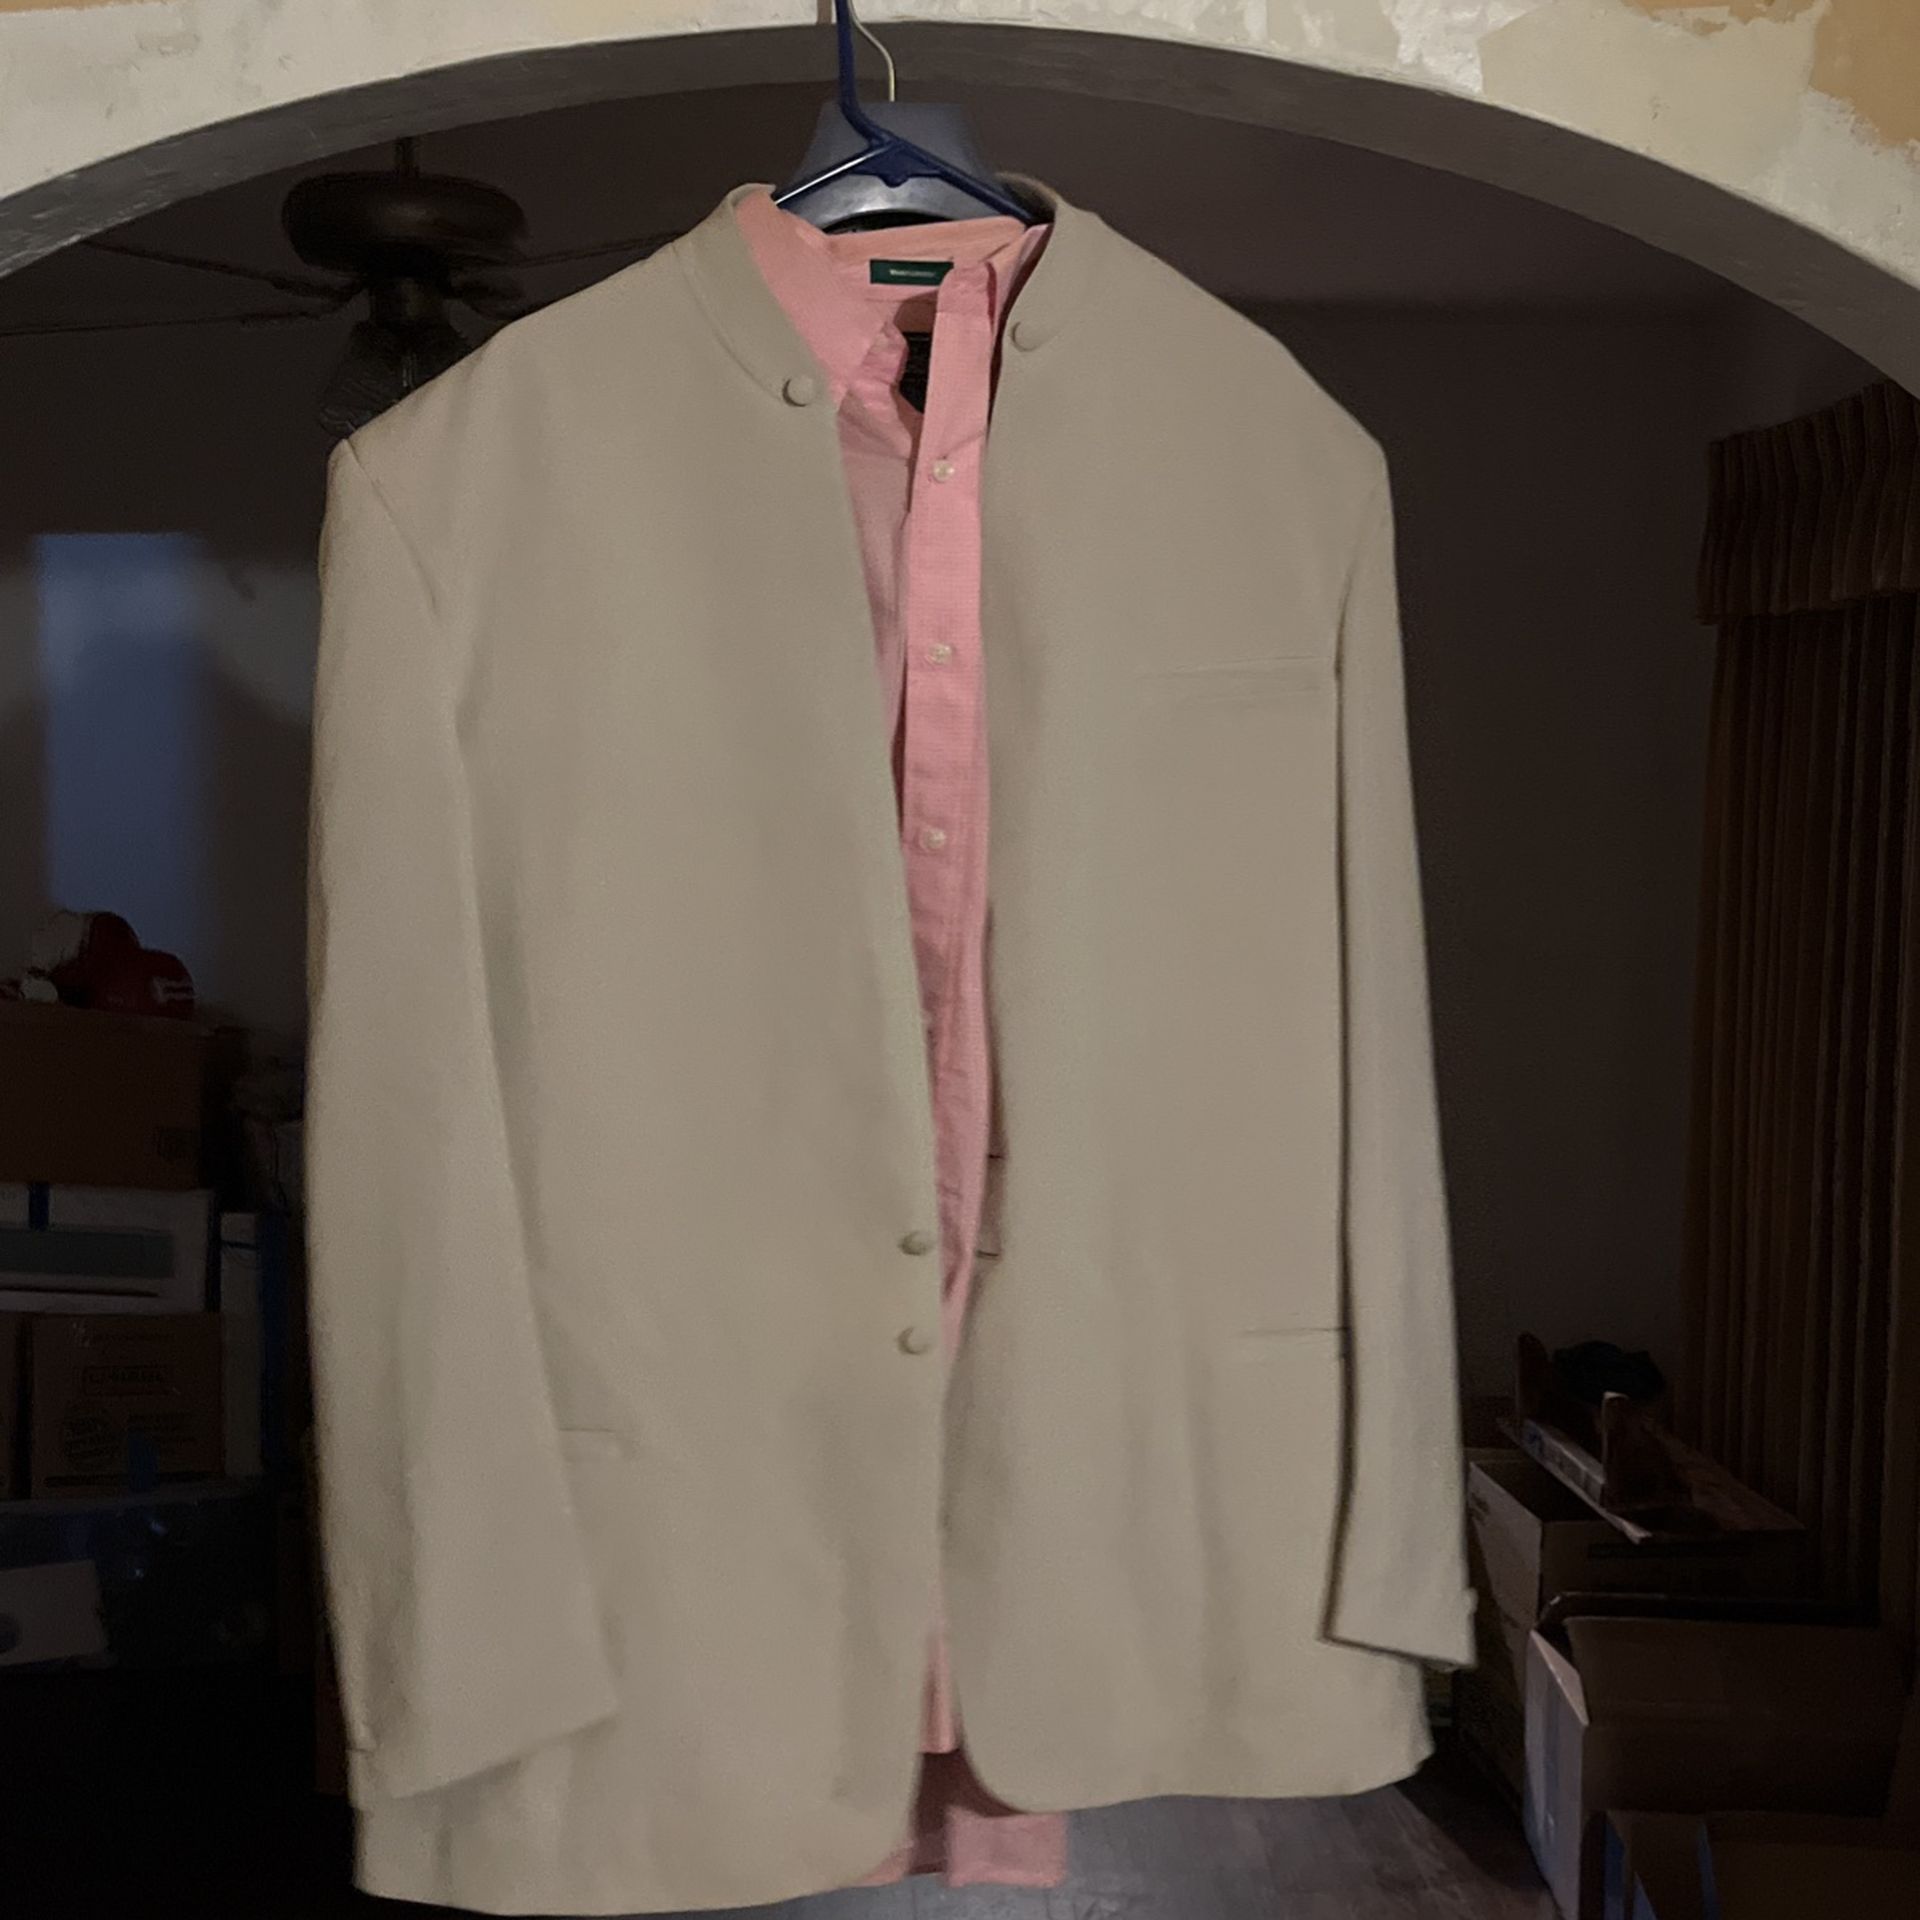 Cream Like Color Jacket And Pants Size Xxl And Pink Under Shirt Xl